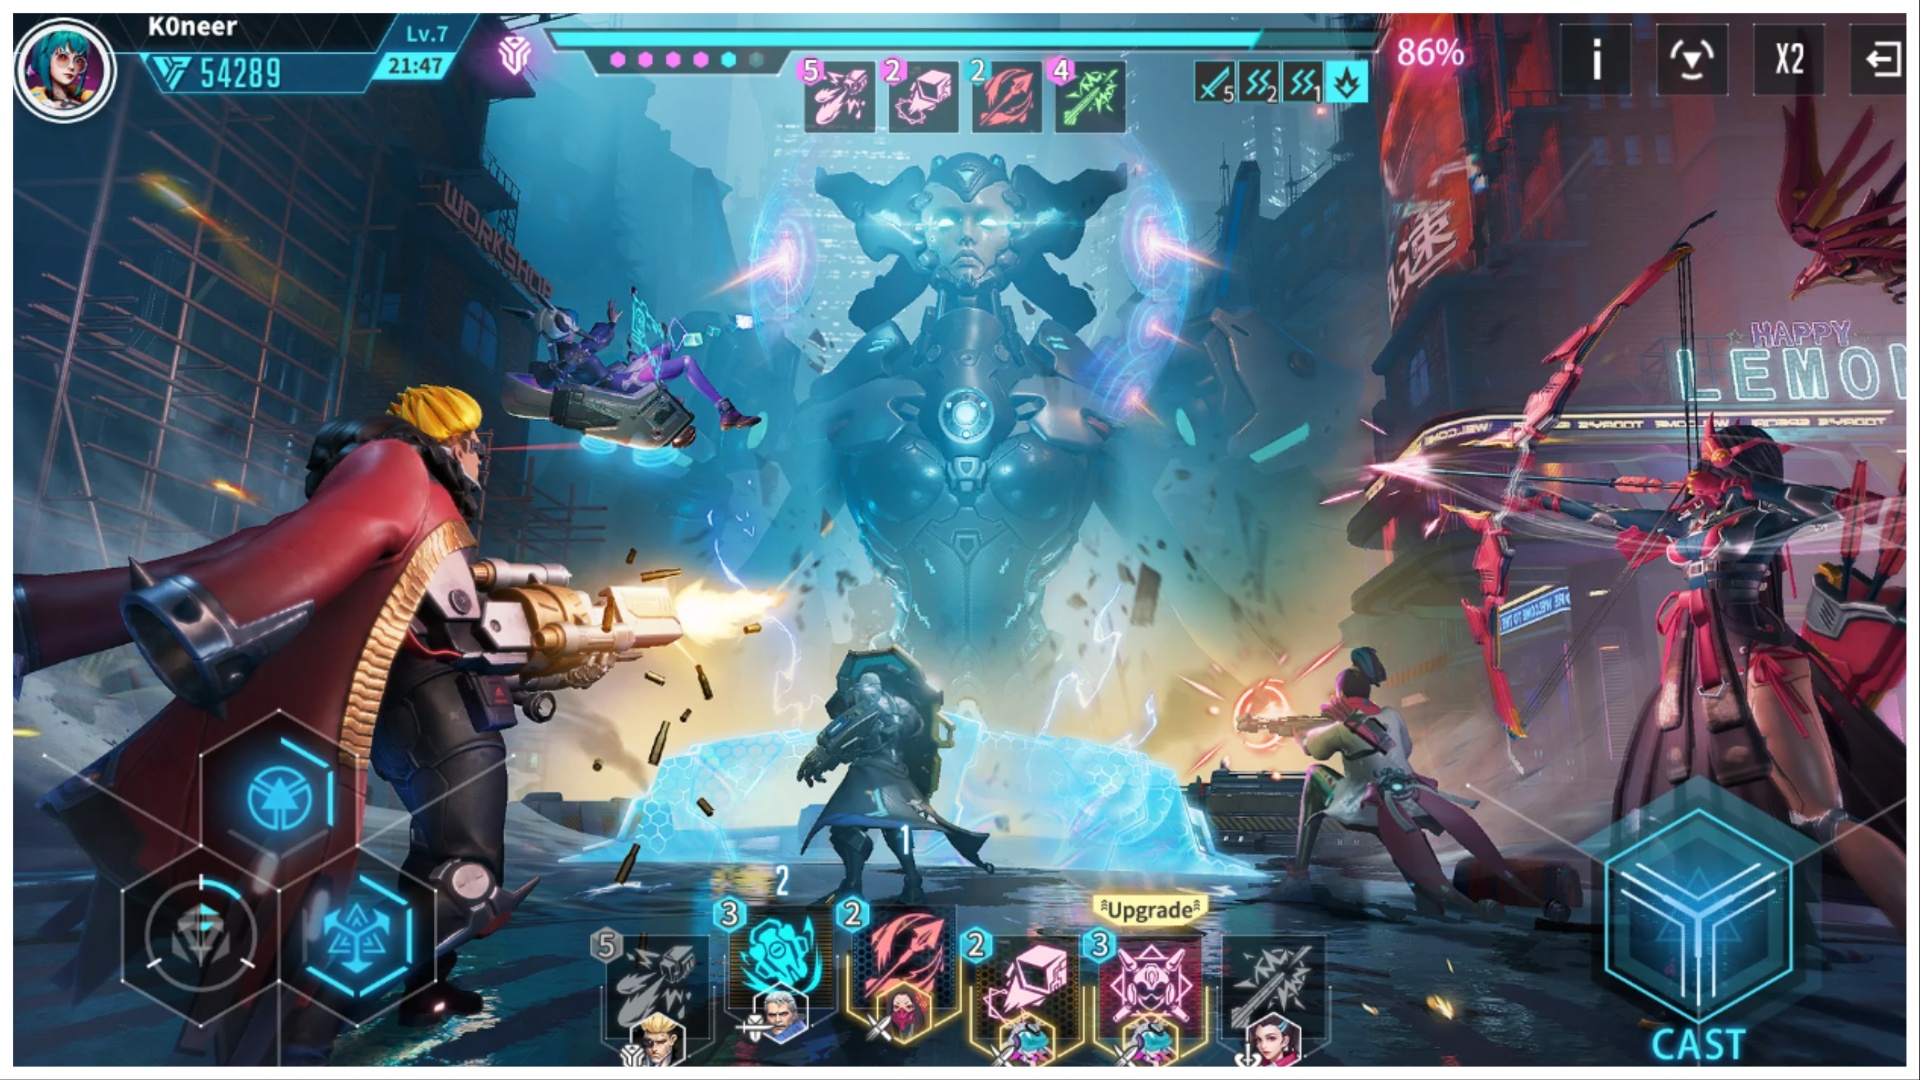 The image shows a ton of futuristic looking characters facing off against a giant android like woman in the distance